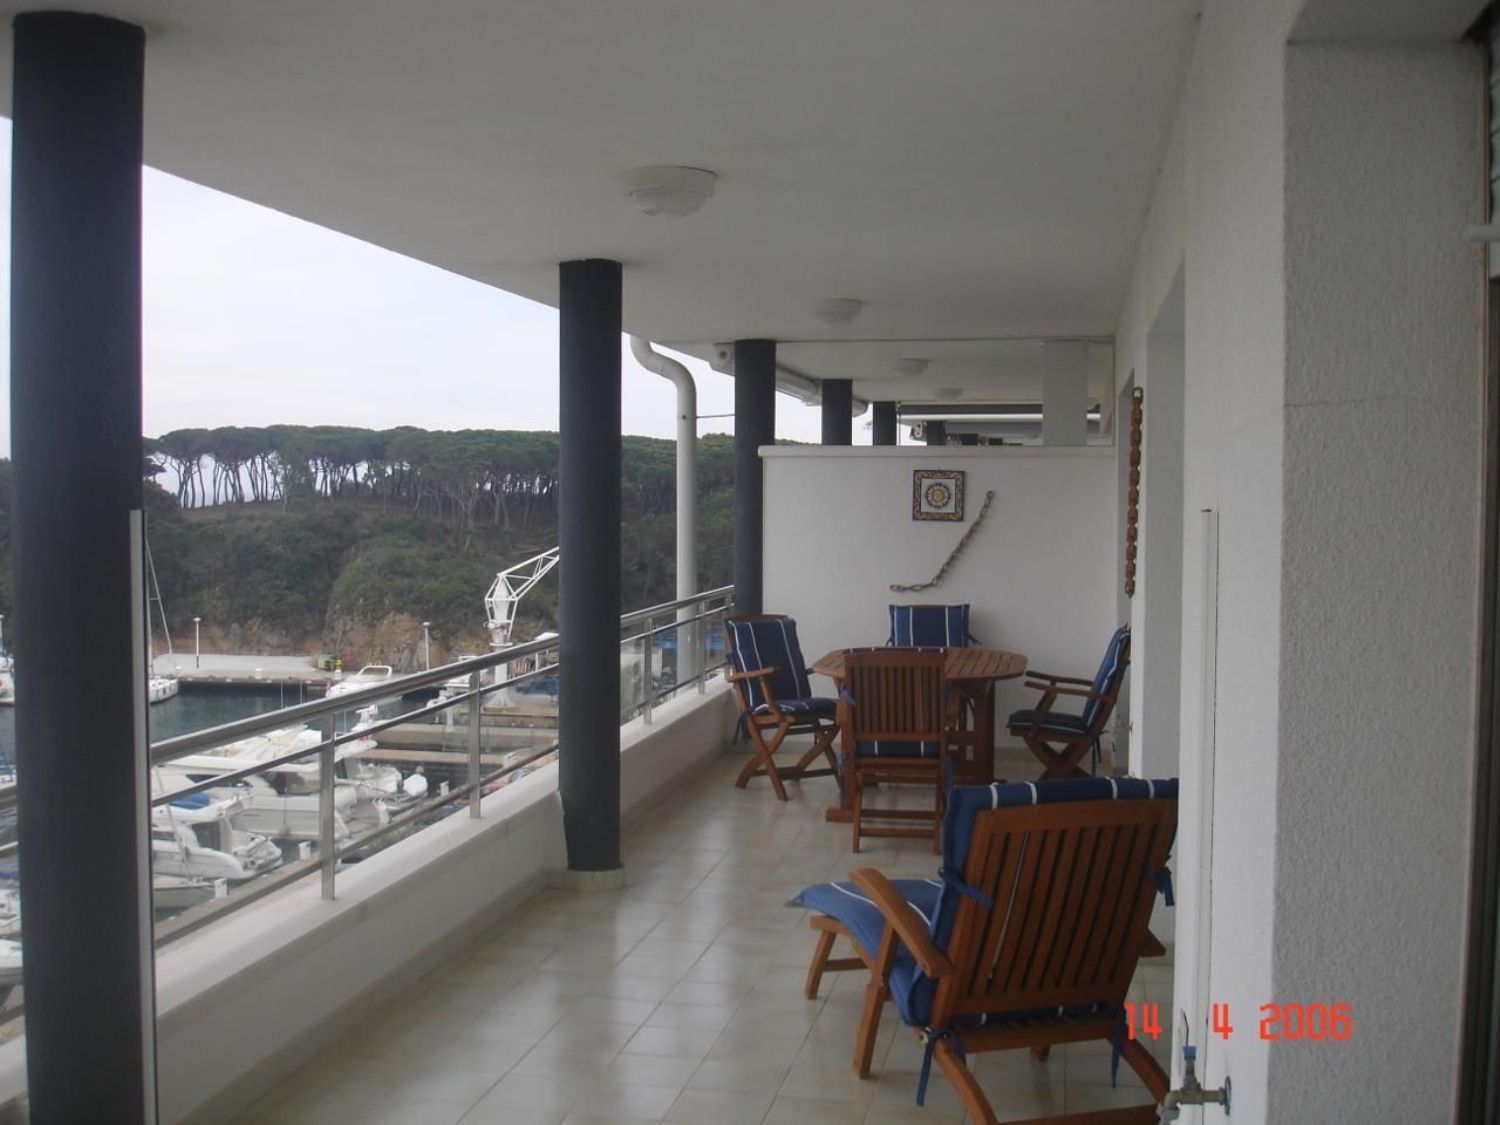 Duplex for sale on the seafront on Punta Prima street, in Platja d'Aro